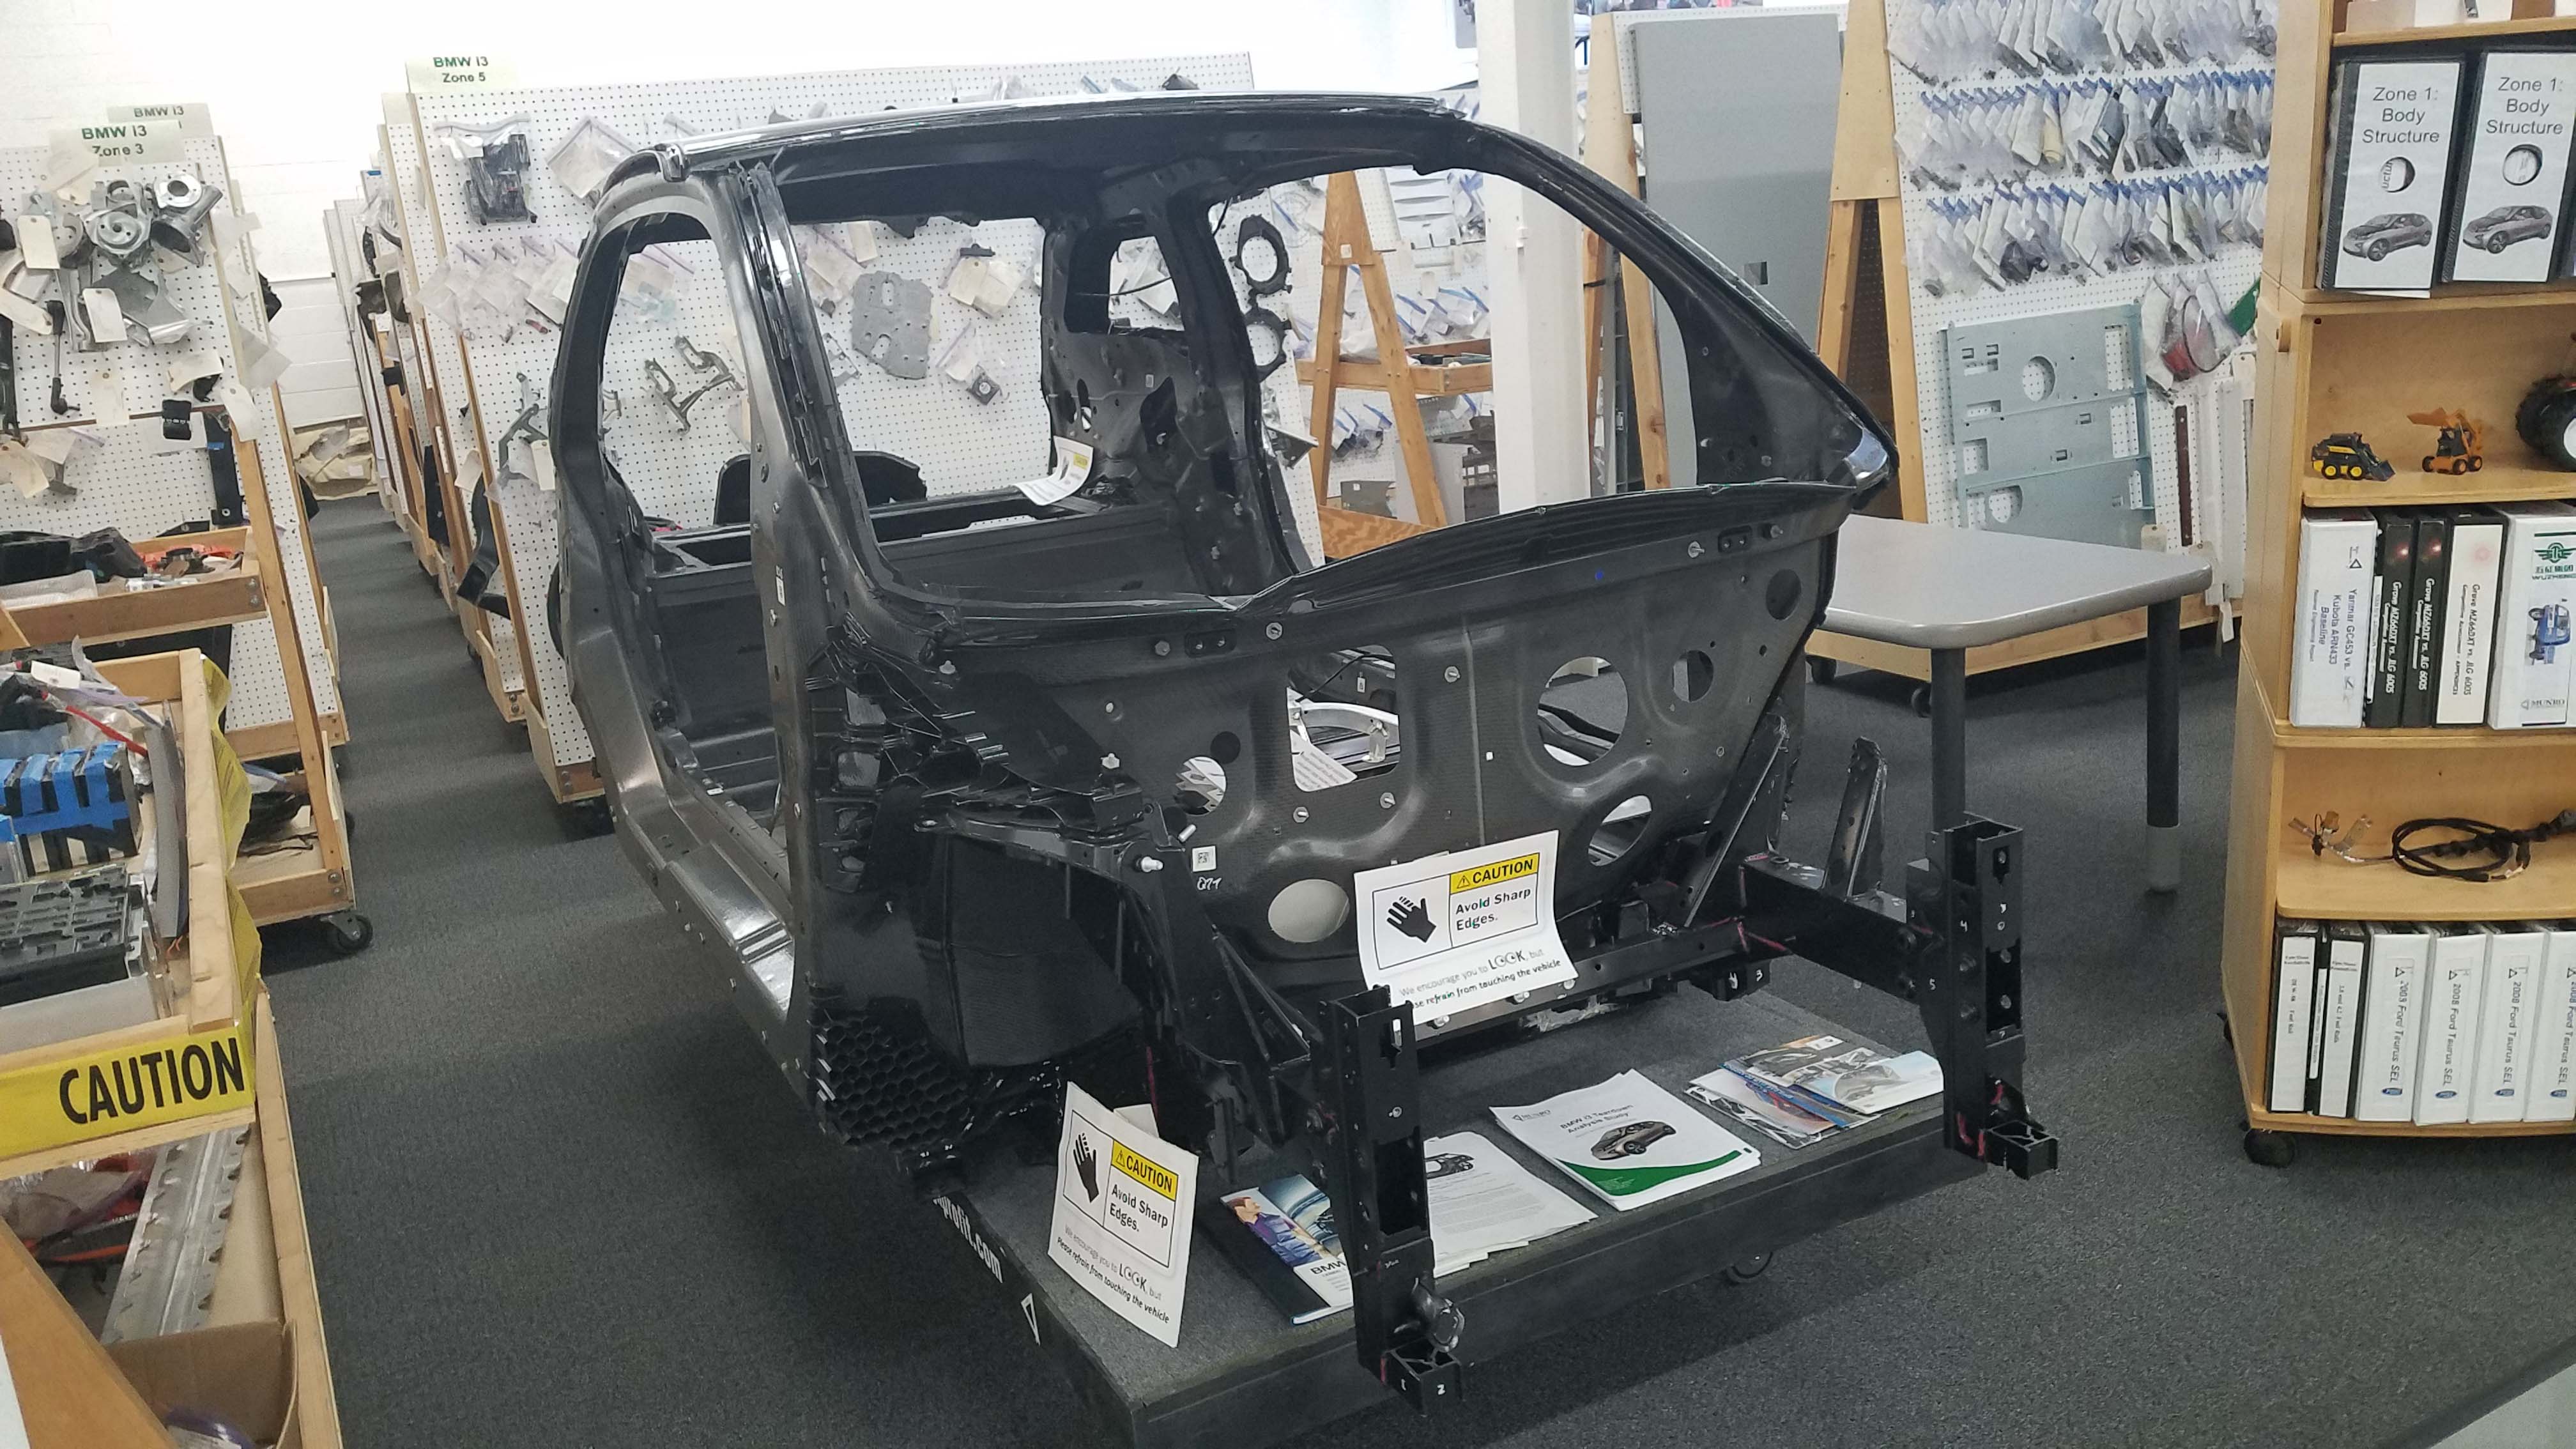 Munro & Associates dis-assembles multiple cars for evaluation. This is a BMW i3 chassis stripped down to its carbon-fiber backbone.